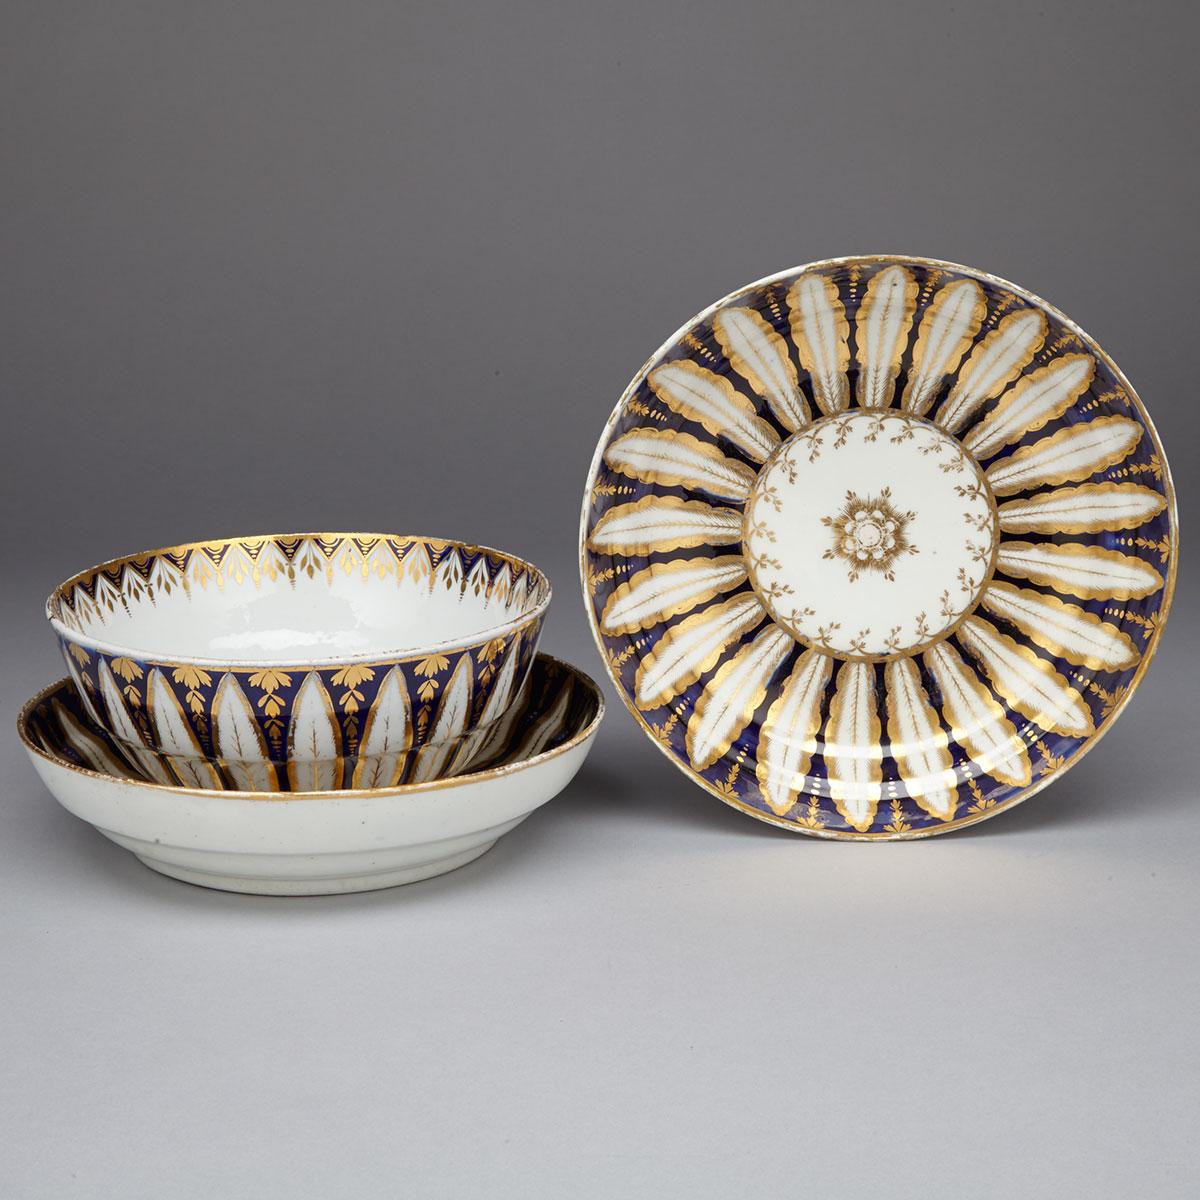 Pair of Chamberlains Worcester ‘Sir Charles Talbot’ Pattern Saucer Dishes and a Bowl, c.1800